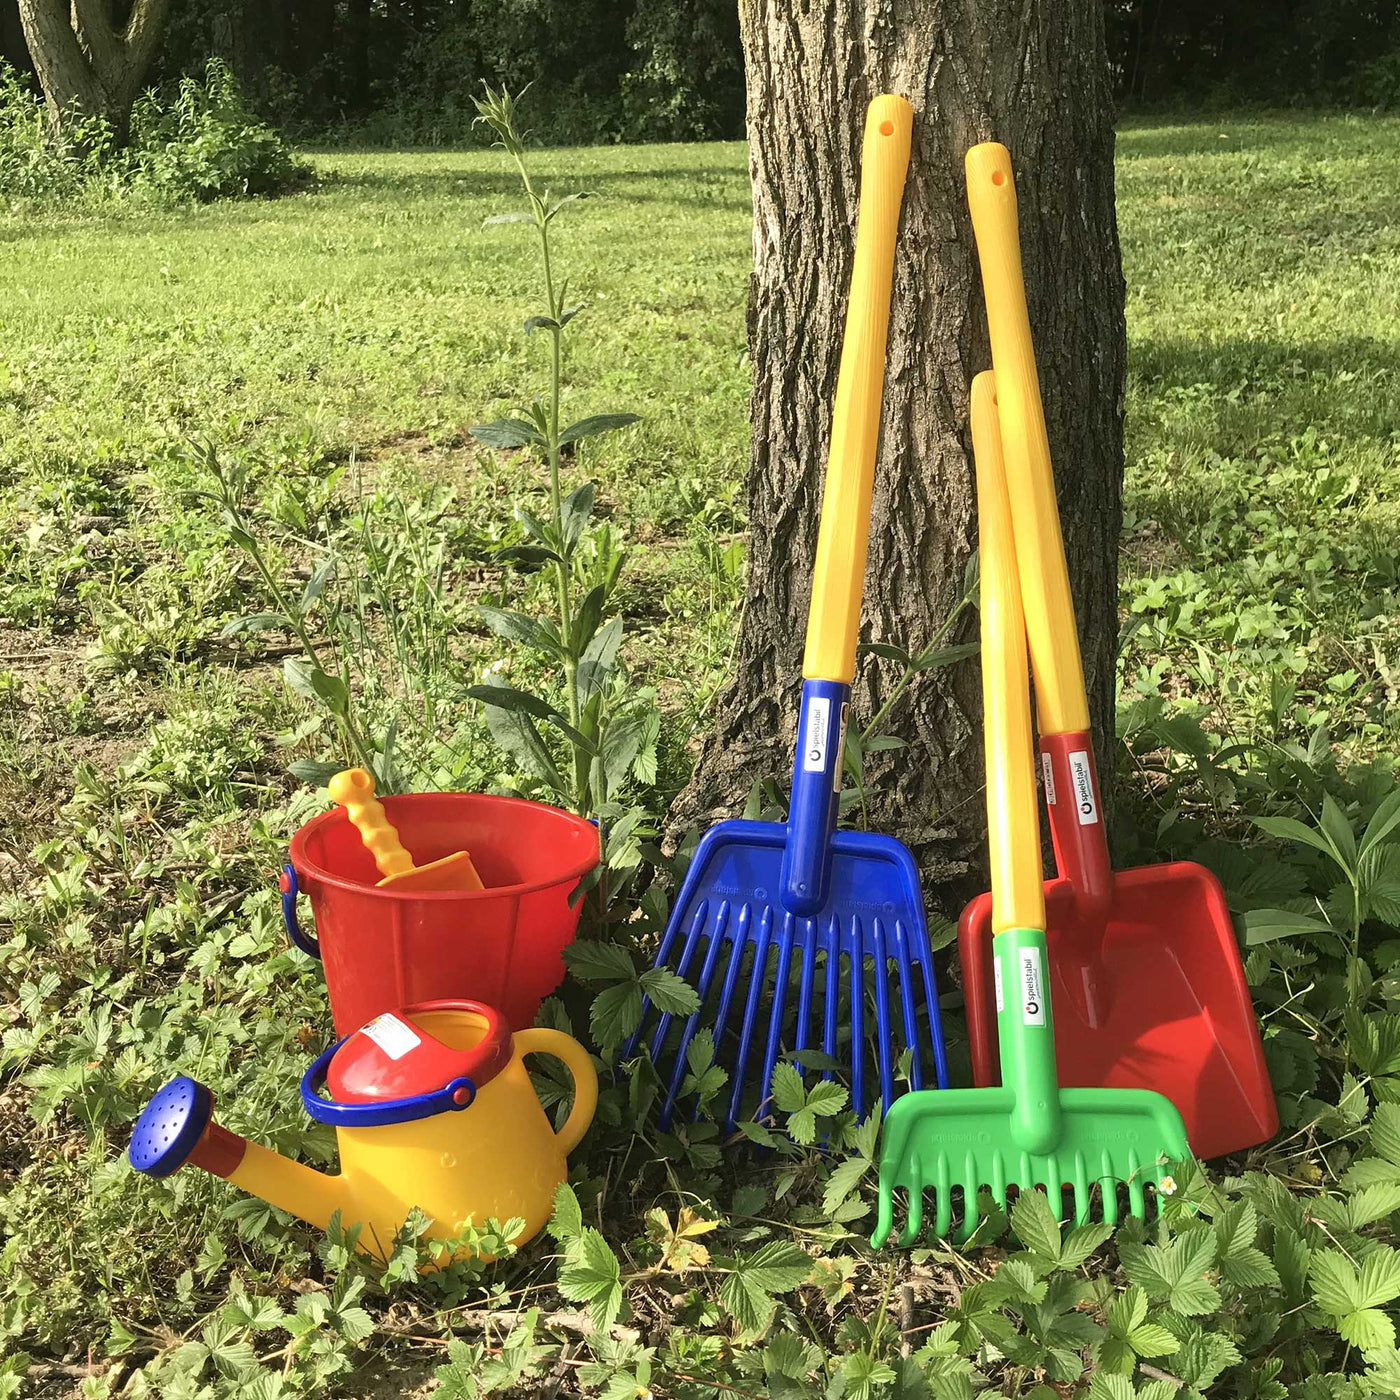 Spielstabil Garden Toy Collection with watering can, pail, garden rake, and heavy duty shovel